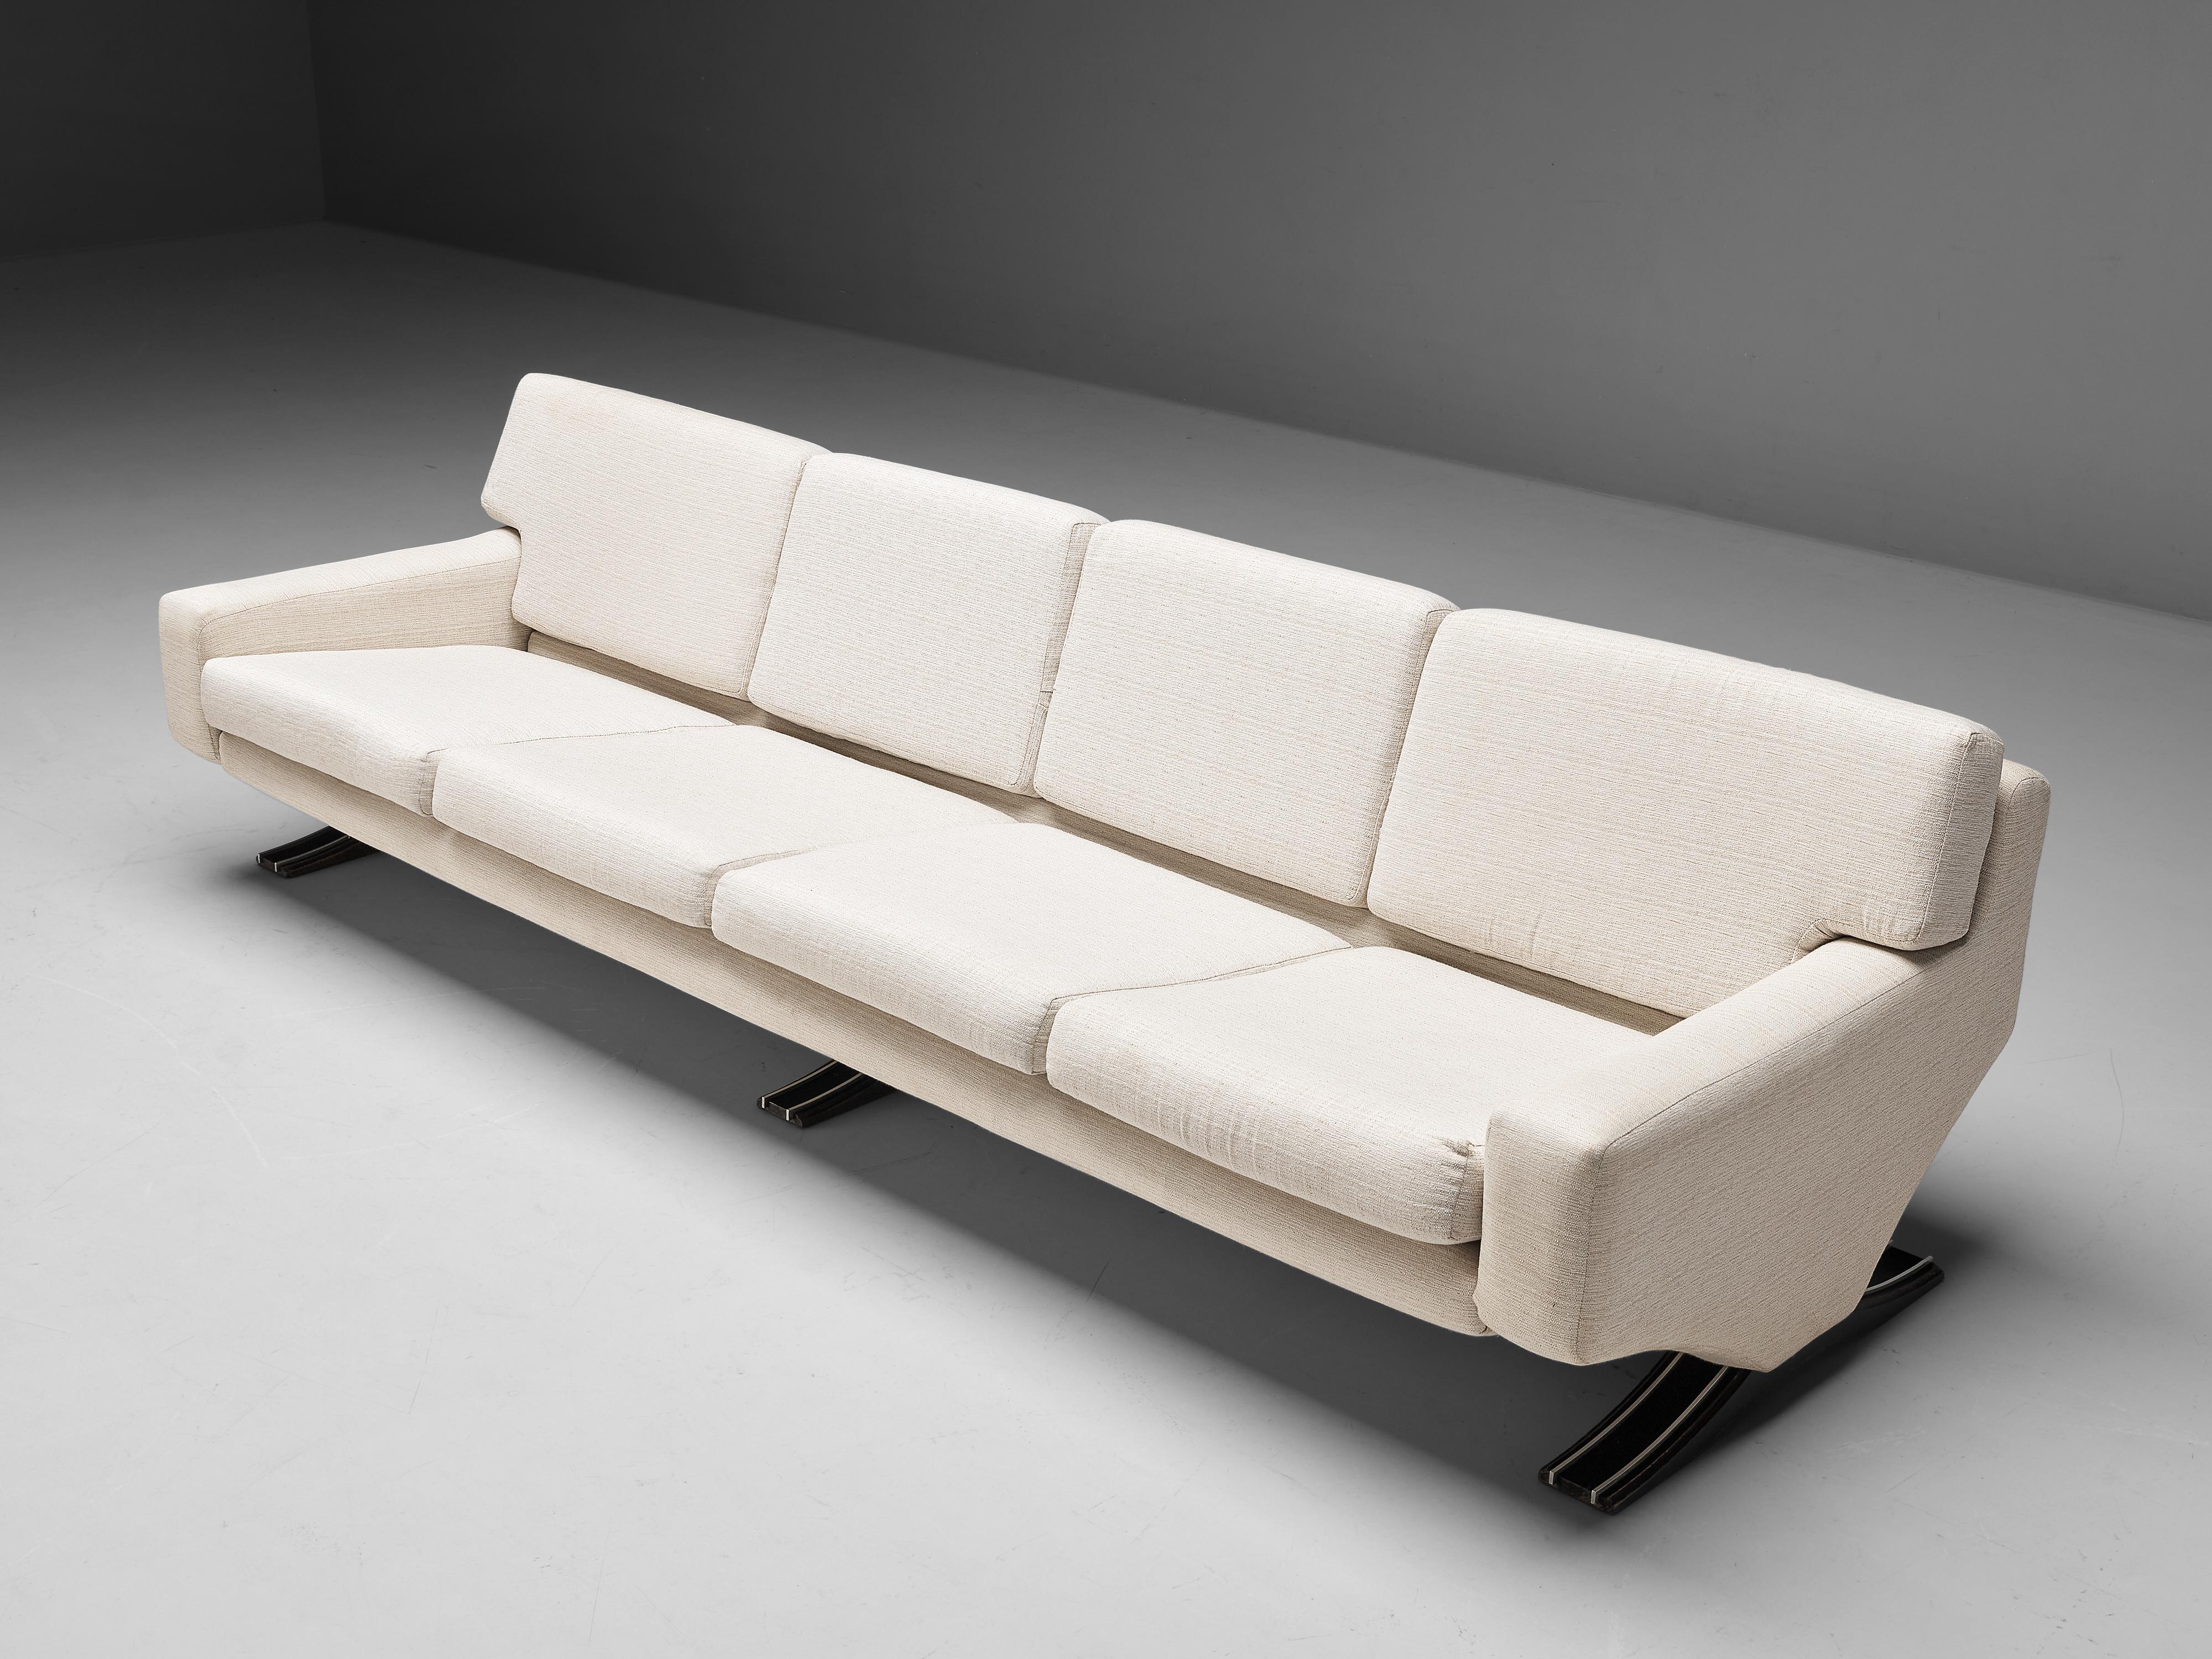 Franz T. Sartori, four seat sofa, fabric, wood, metal, Italy, 1970s

Bulky and grand sofa with sculptural feel. The large sofa has a strong appearance due to the straight lines in its design. The waved, sculptural legs lift the seat from the